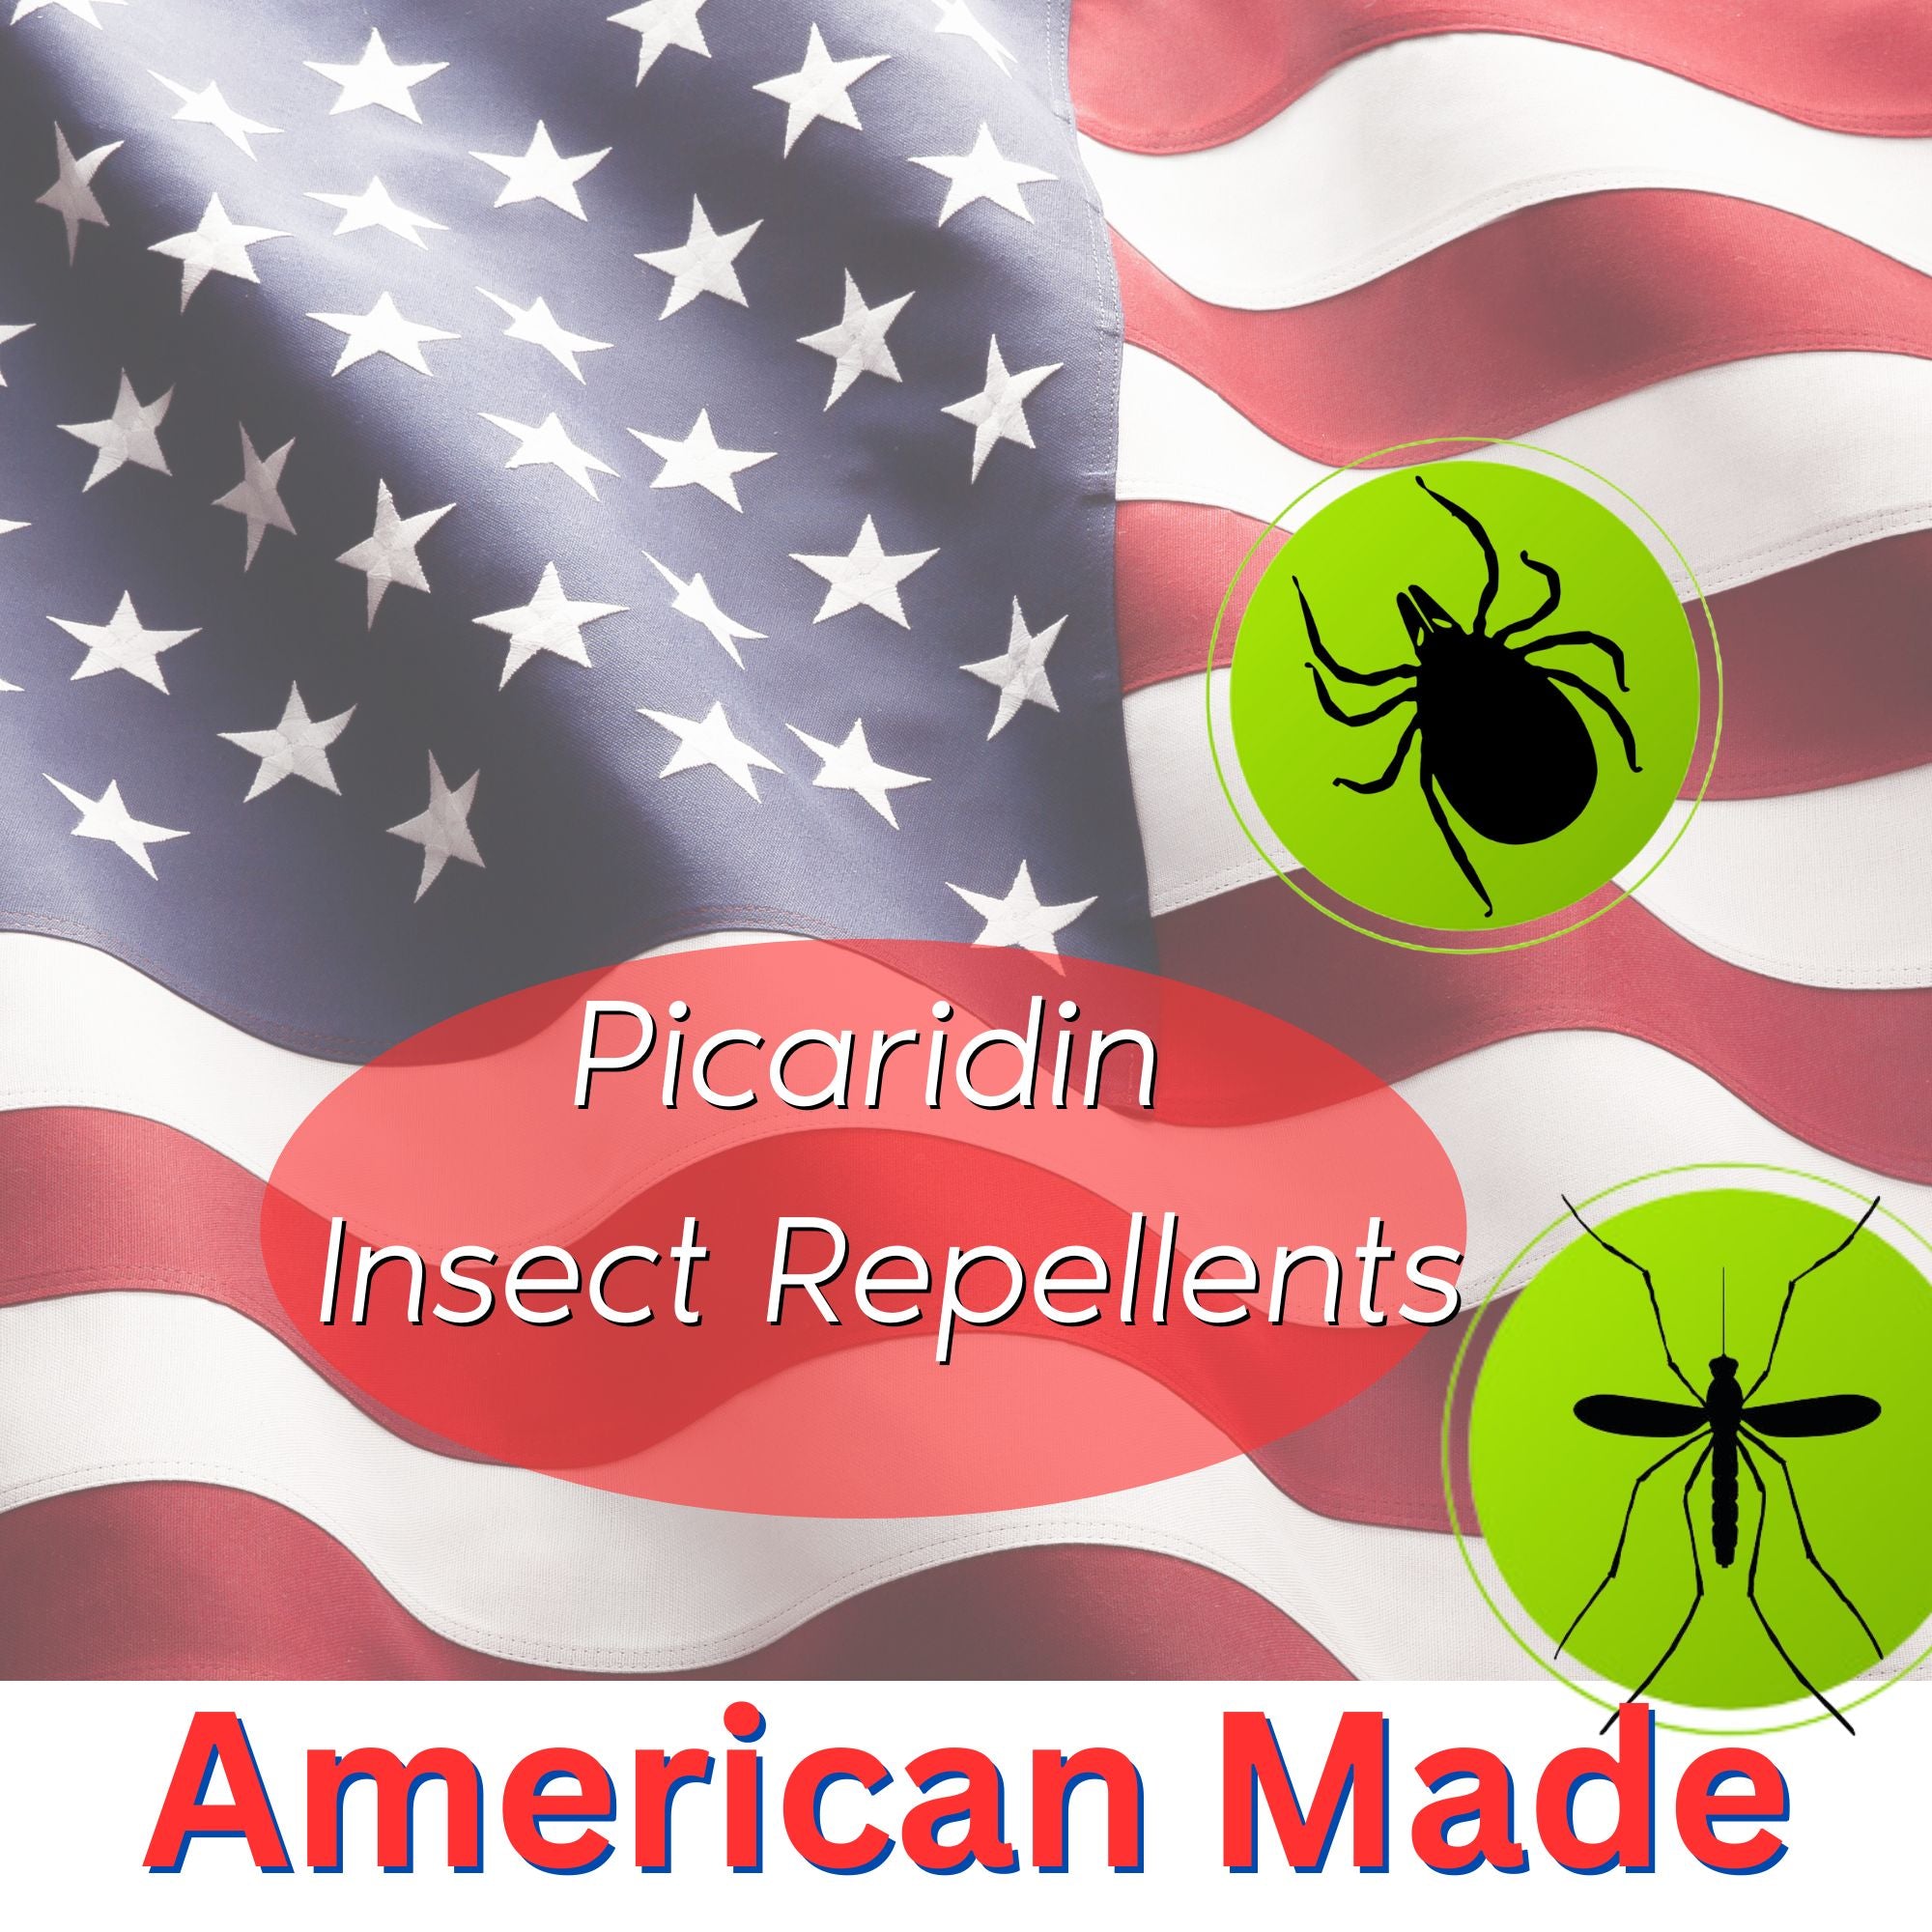 Insect Repellent Picaridin Scented Mistosol + Refill Combo